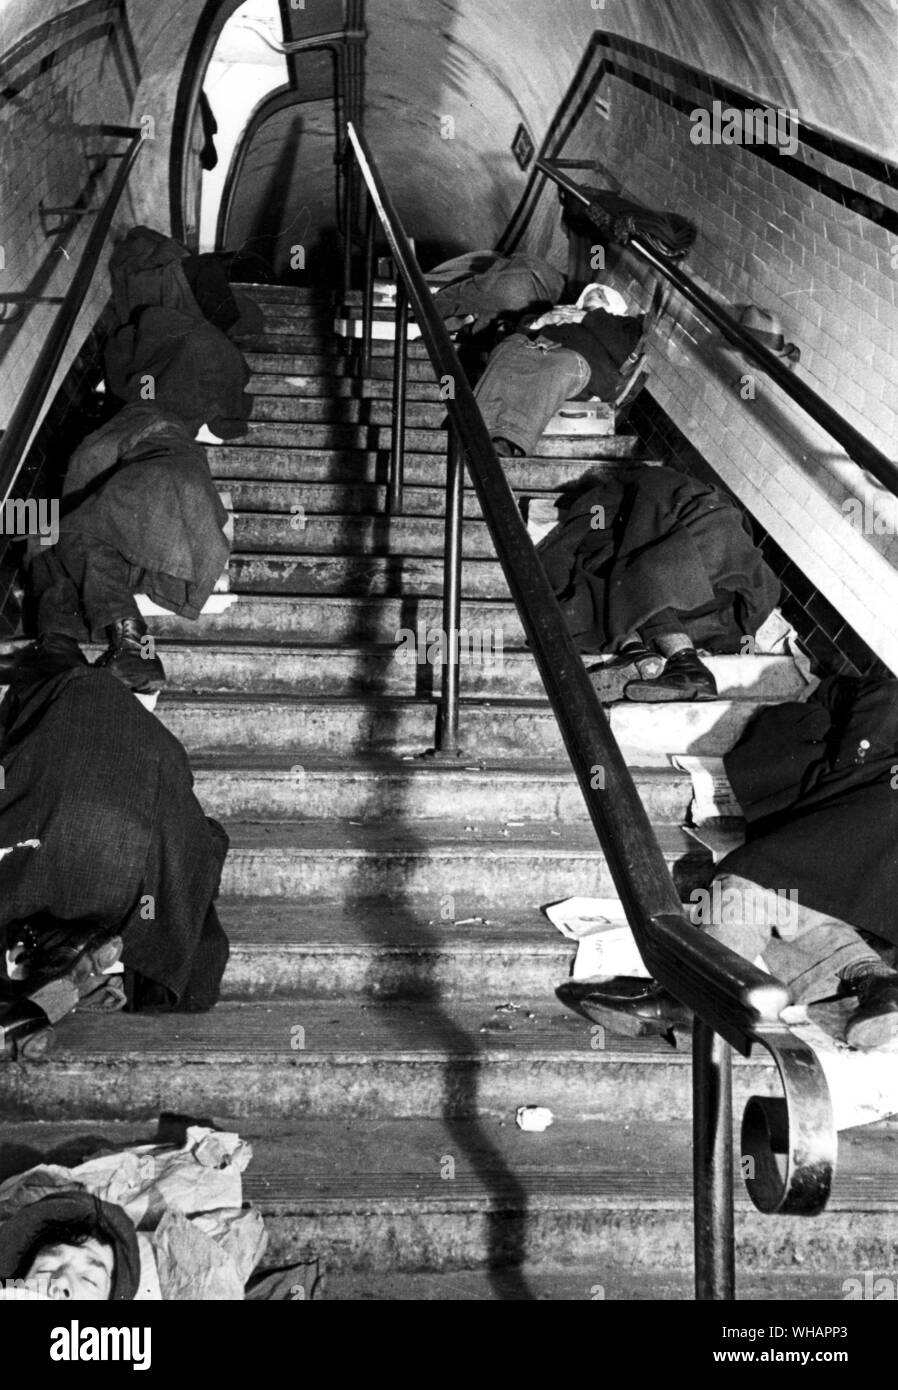 West End London shelter. Sleeping on the stairs Stock Photo